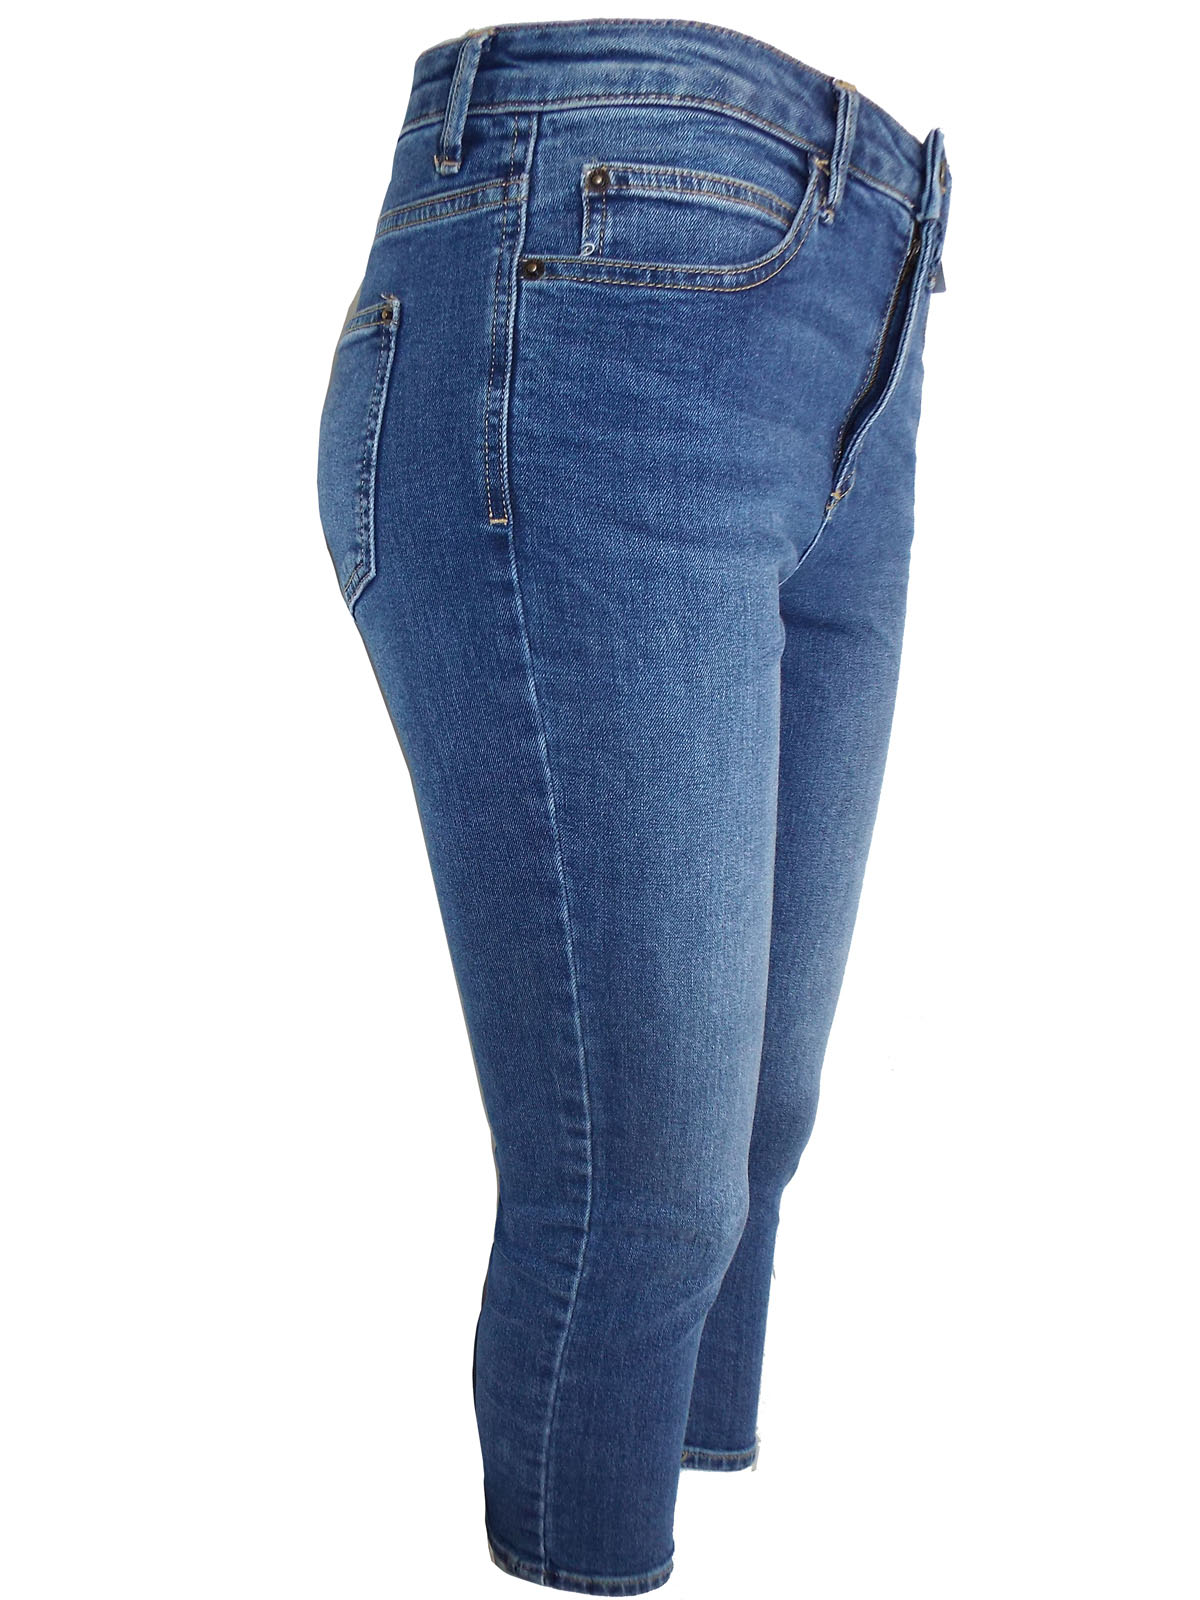 Marks and Spencer - - M&5 Bright INDIGO Mid Rise Cropped Super Skinny ...